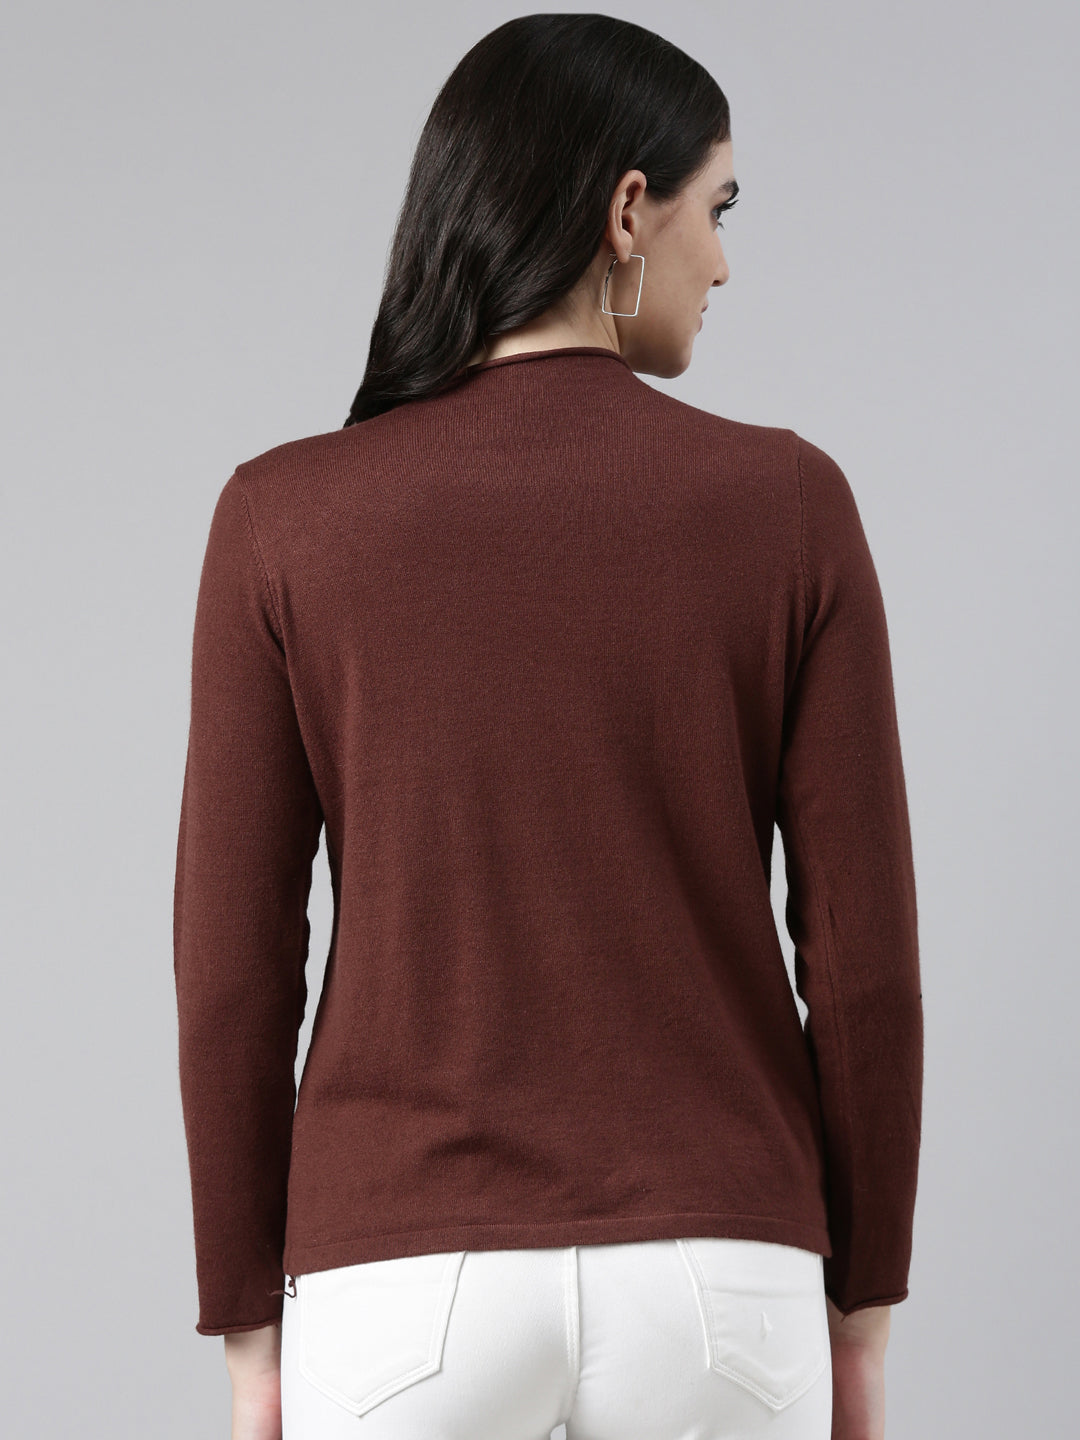 Women High Neck Solid Coffee Brown Top